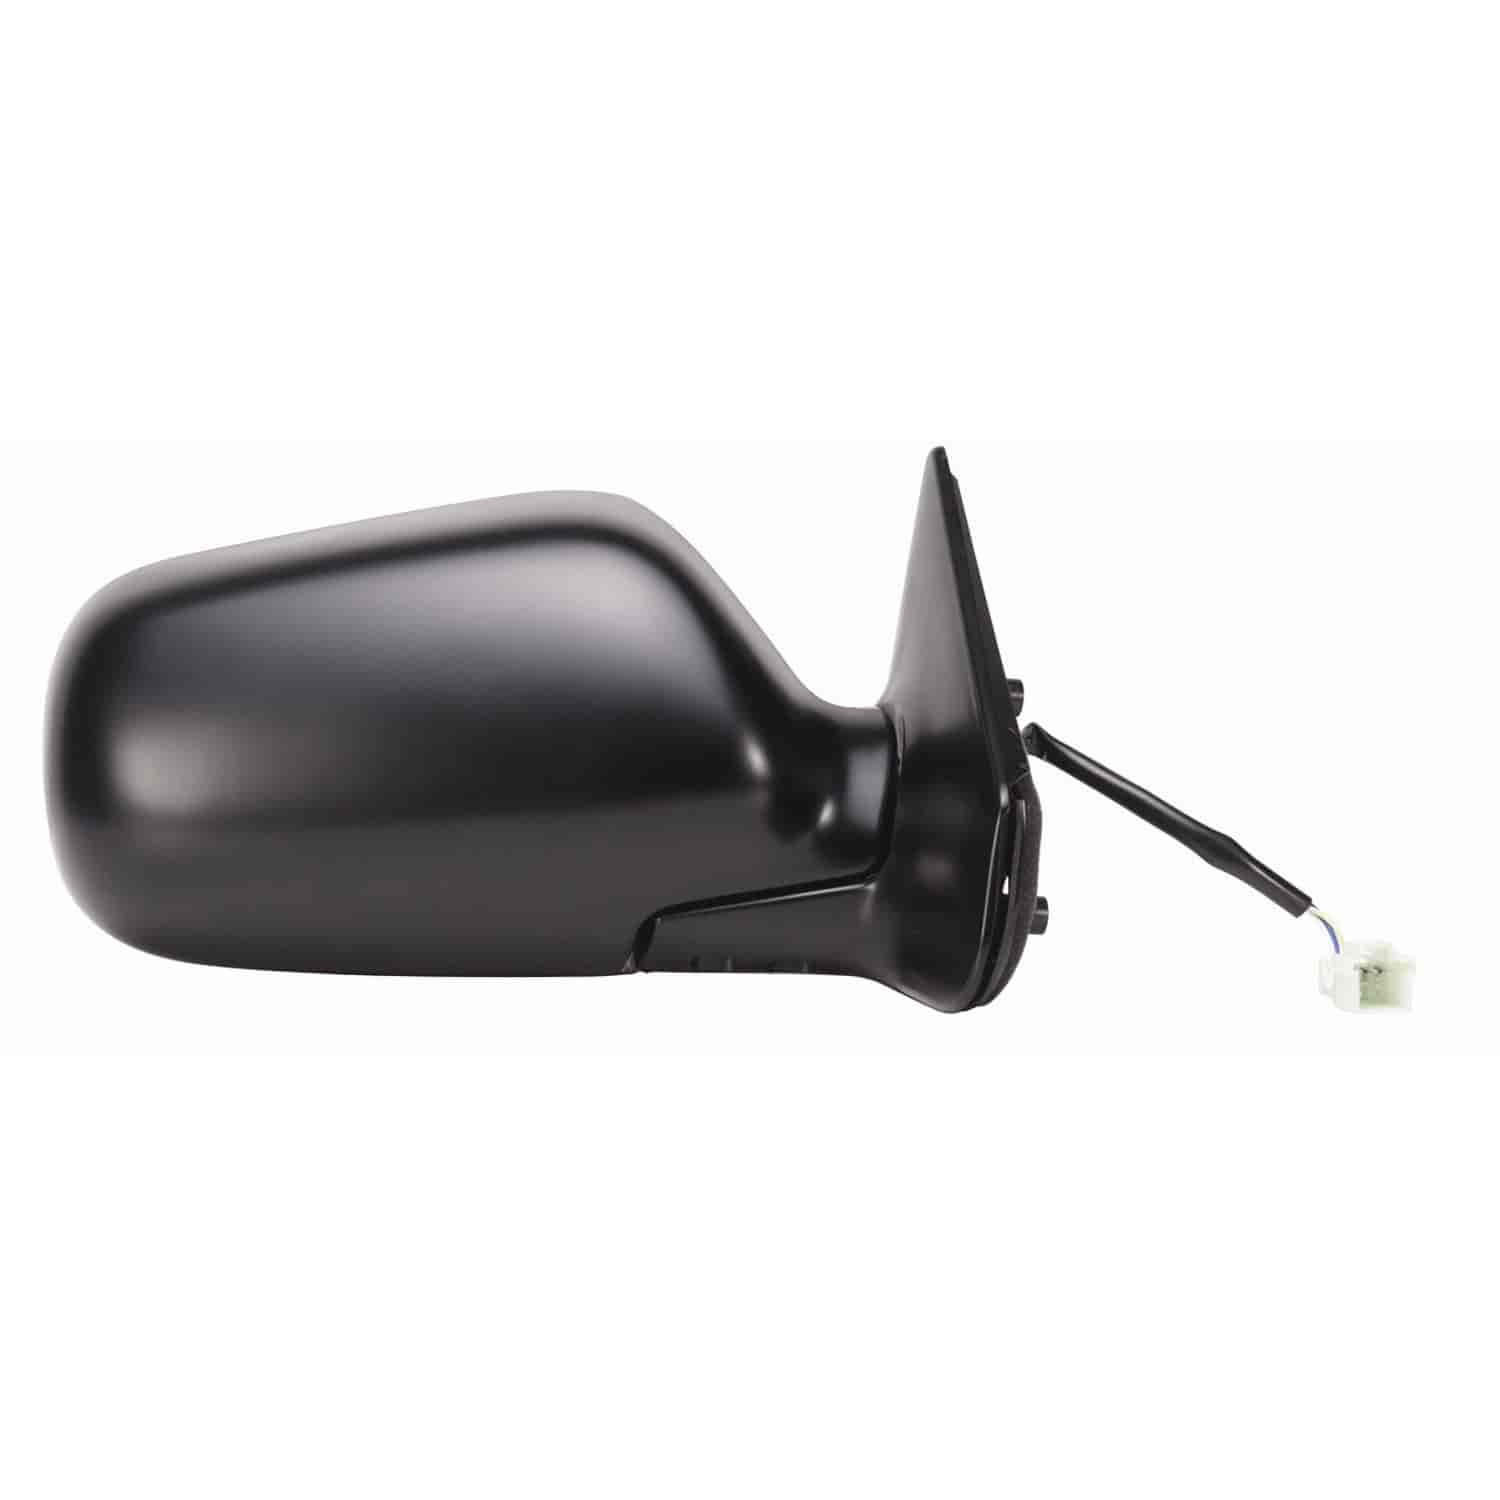 OEM Style Replacement mirror for 95 SUBARU Legacy passenger side mirror tested to fit and function l